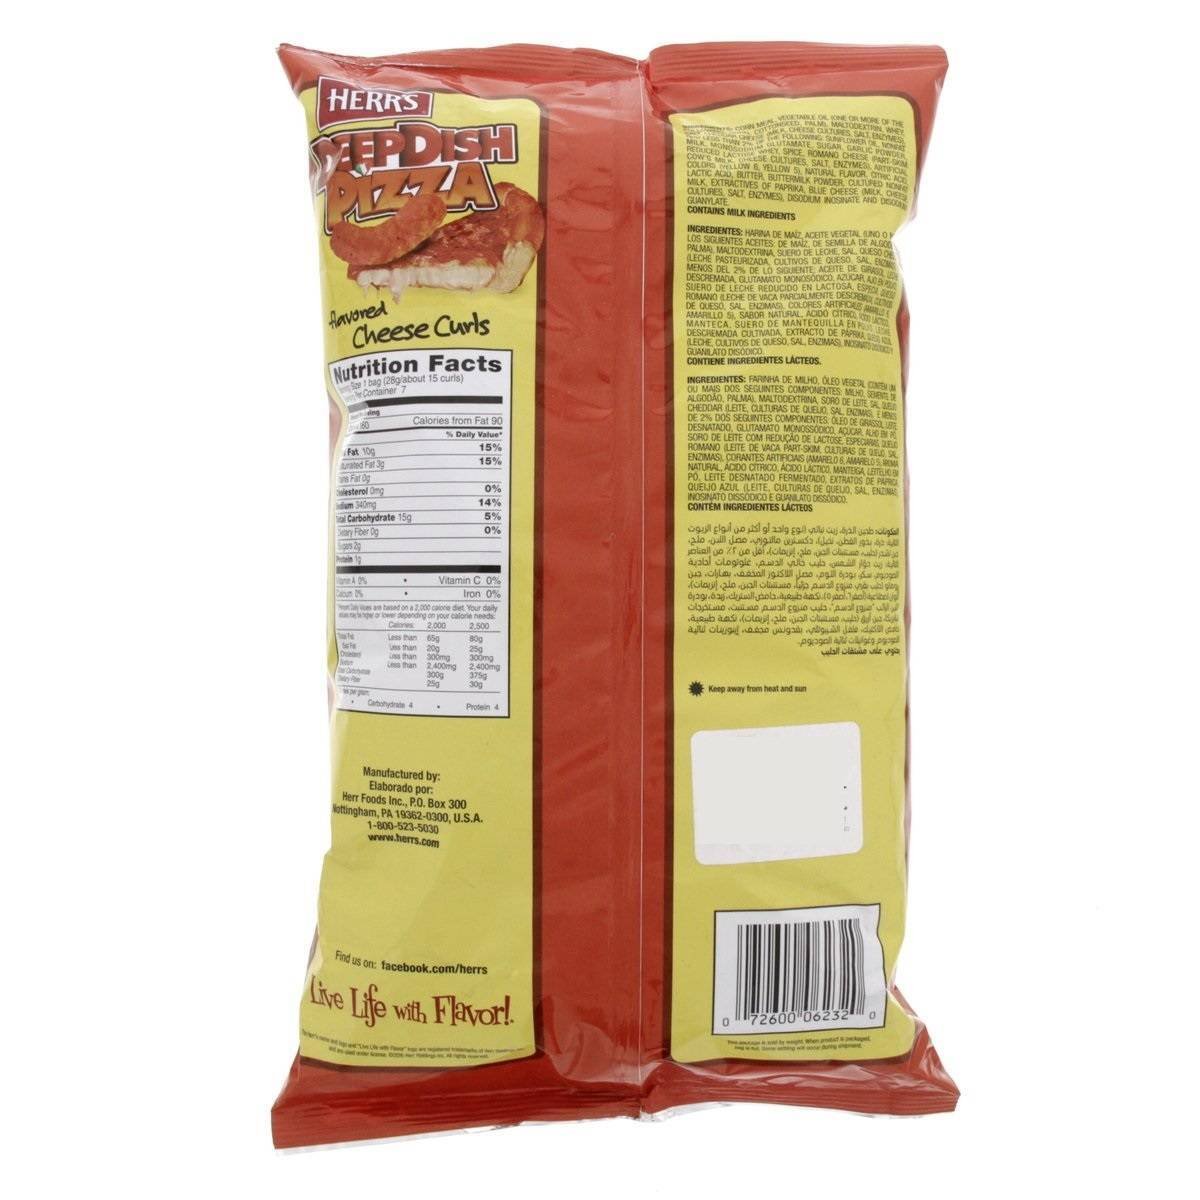 Herr's Deep Dish Pizza Flavored Cheese Curls 170 g